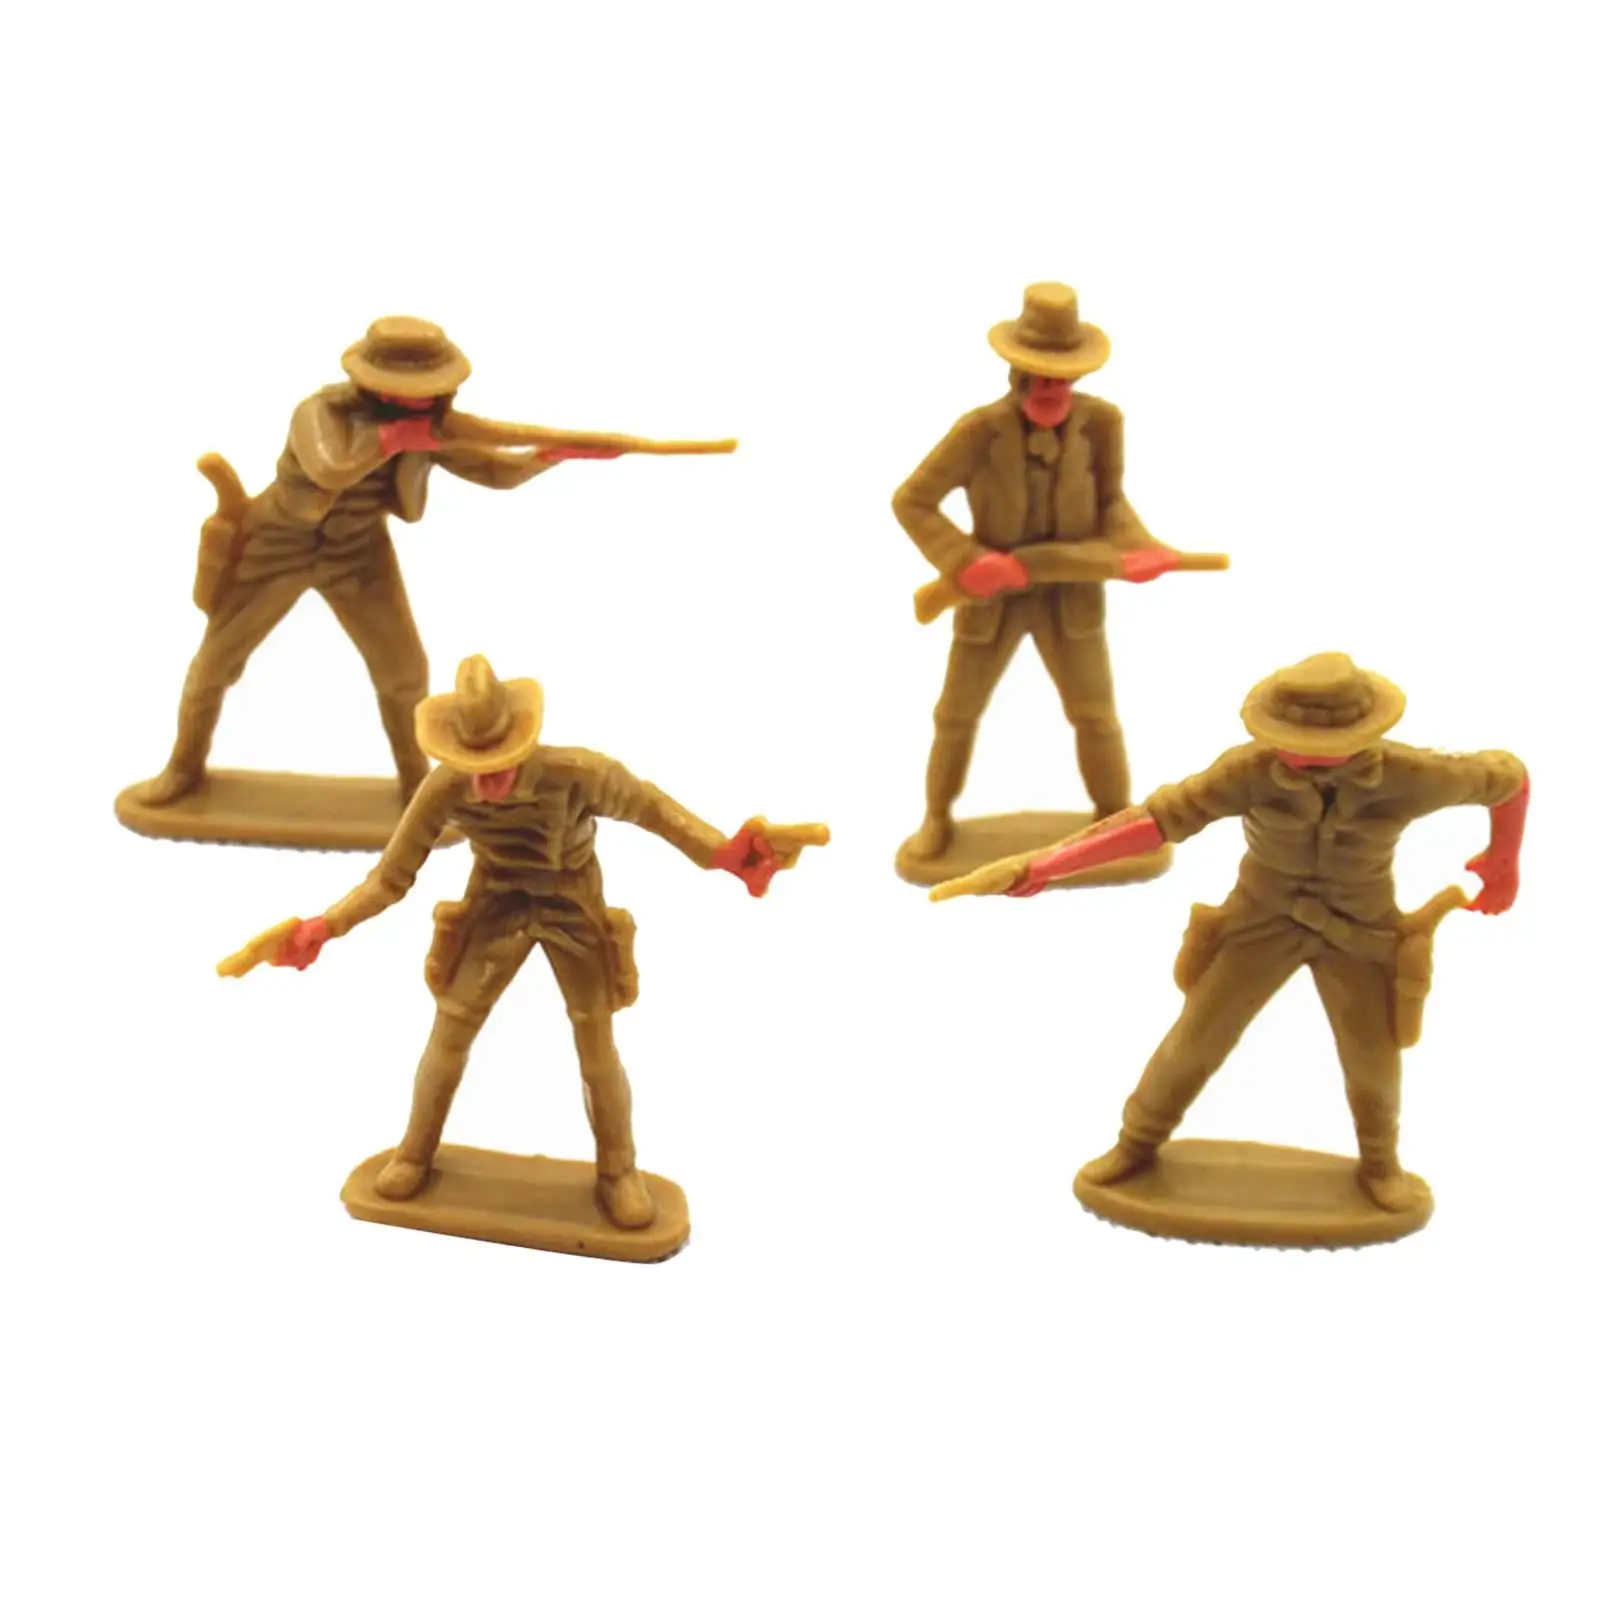 4Pcs Simulation Cowboy People Figures DIY Projects Layout Decoration Fairy Garden Movie Props Collections Diorama Scenery Decor